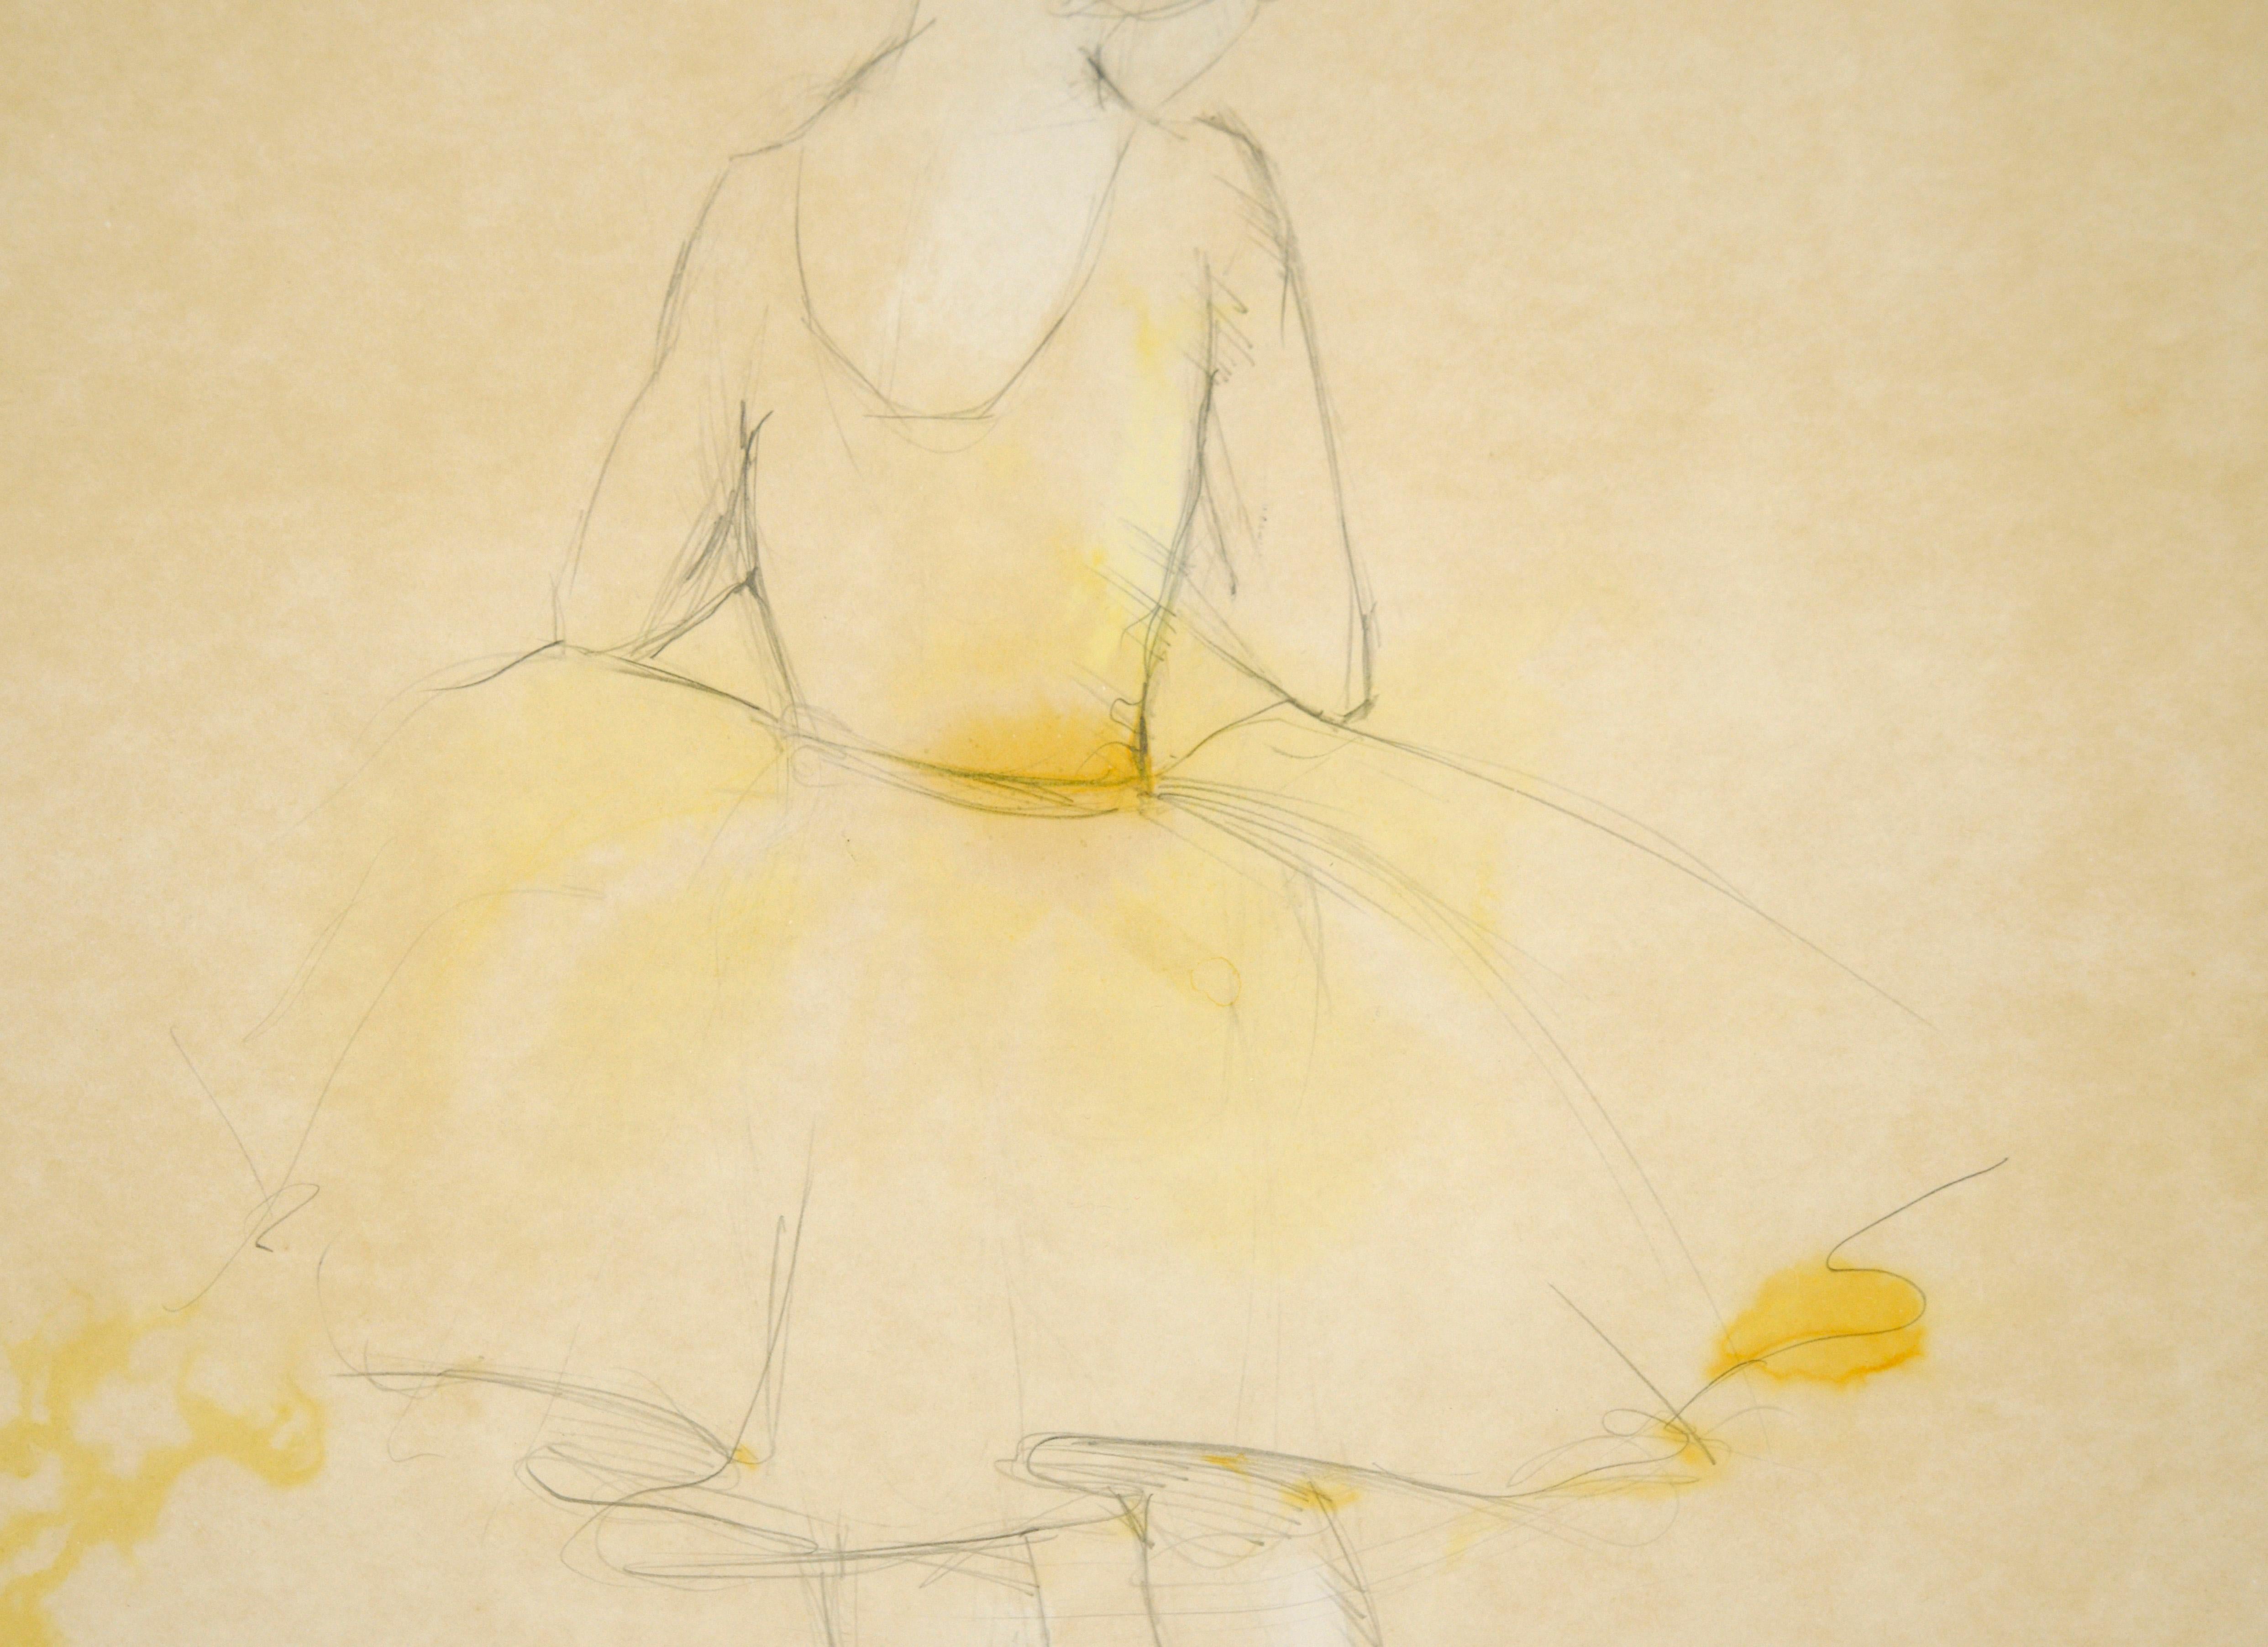 The Little Ballerina - Figurative Drawing in Pencil on Paper - Beige Figurative Art by Unknown